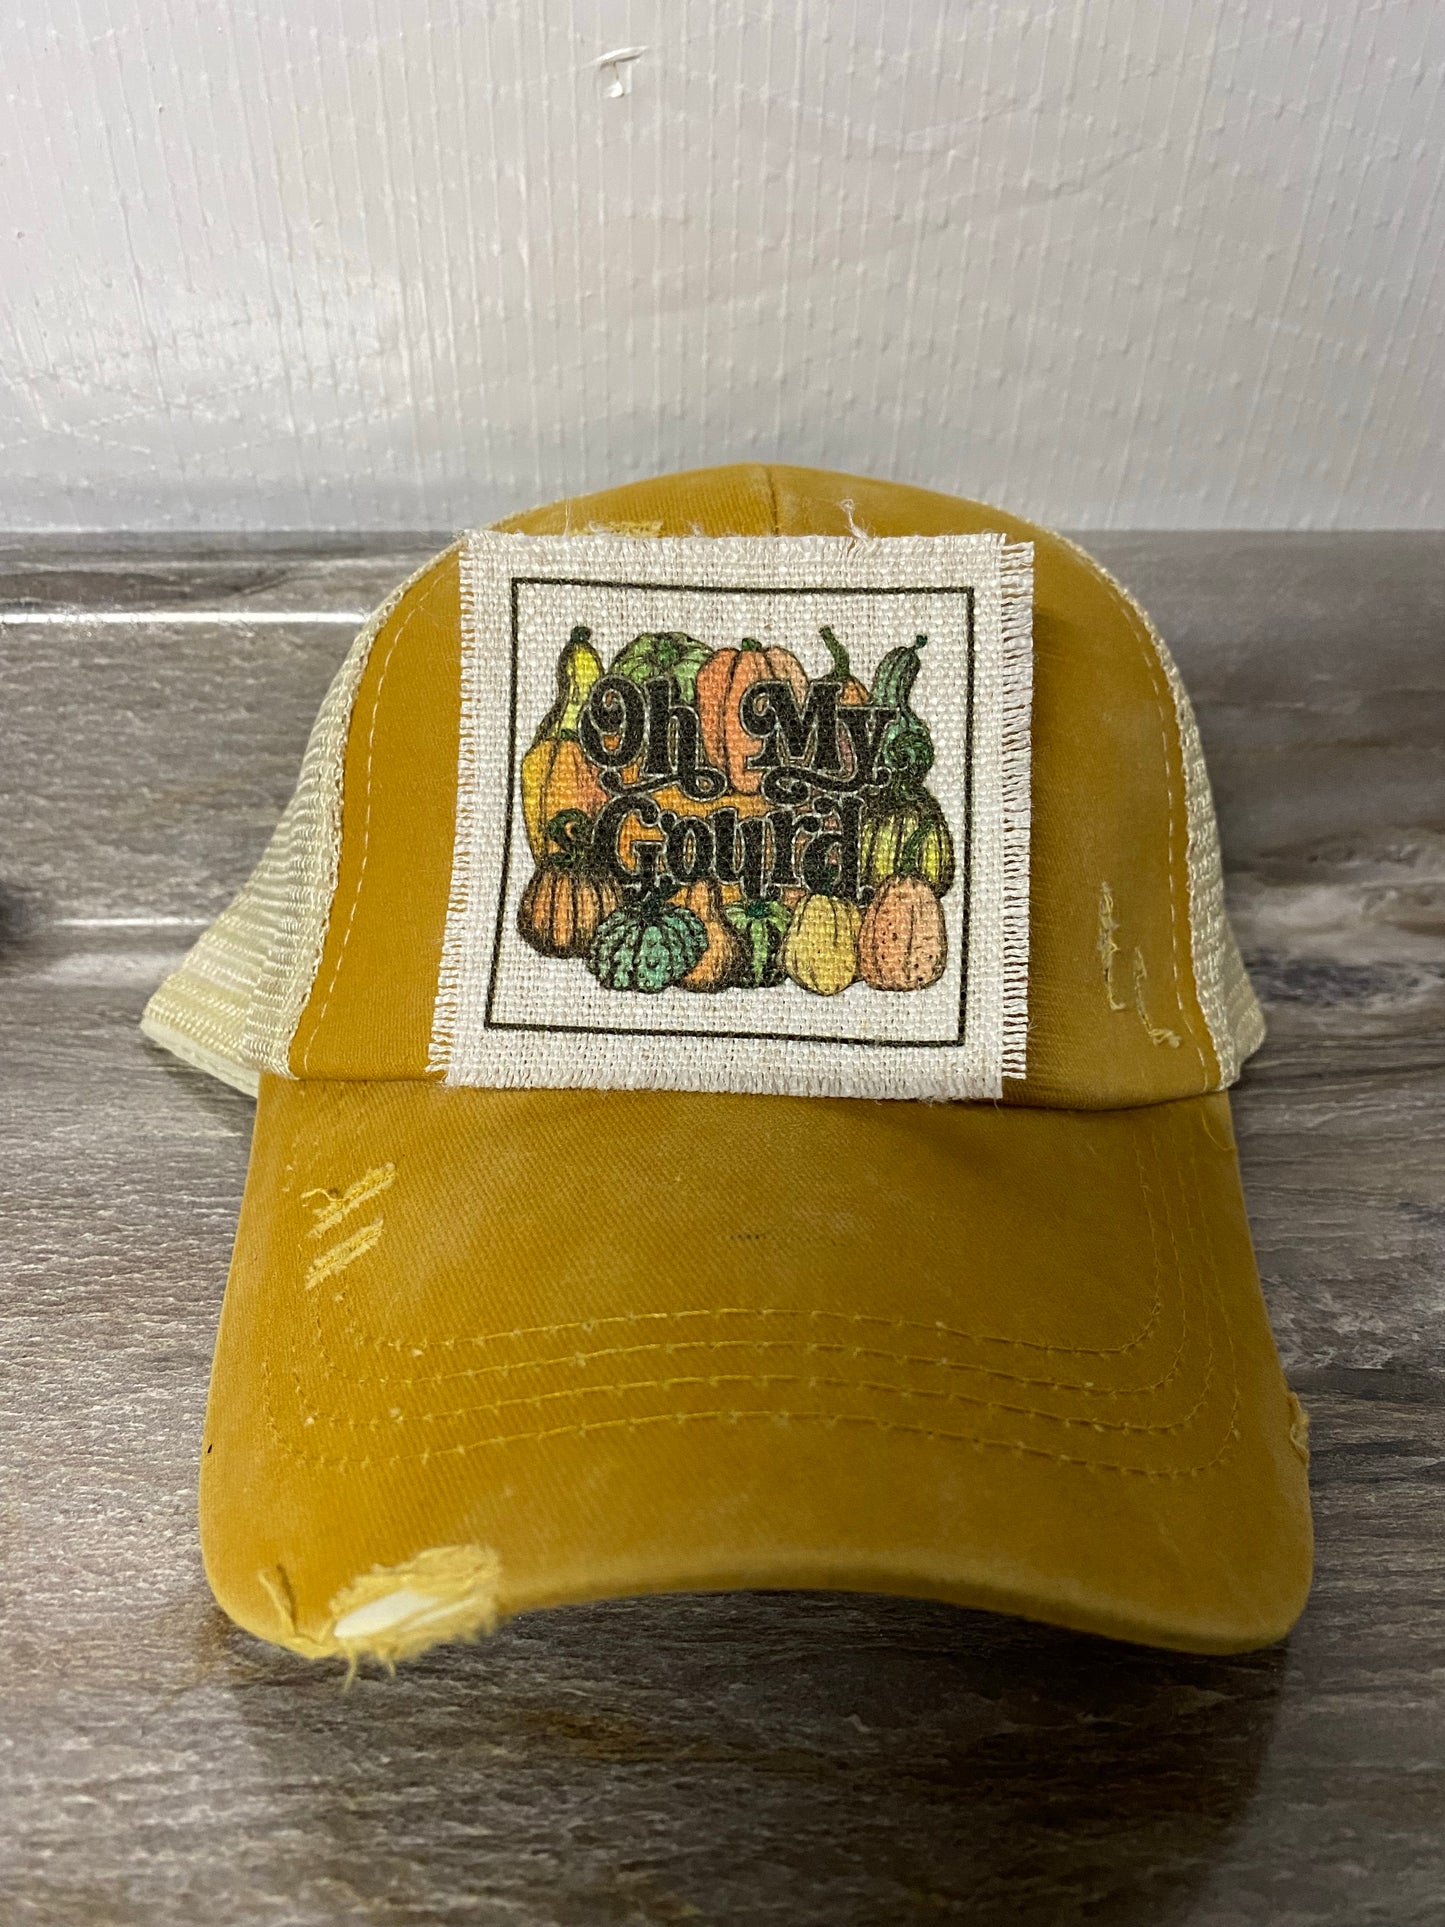 Oh My Gourd Hat Patch